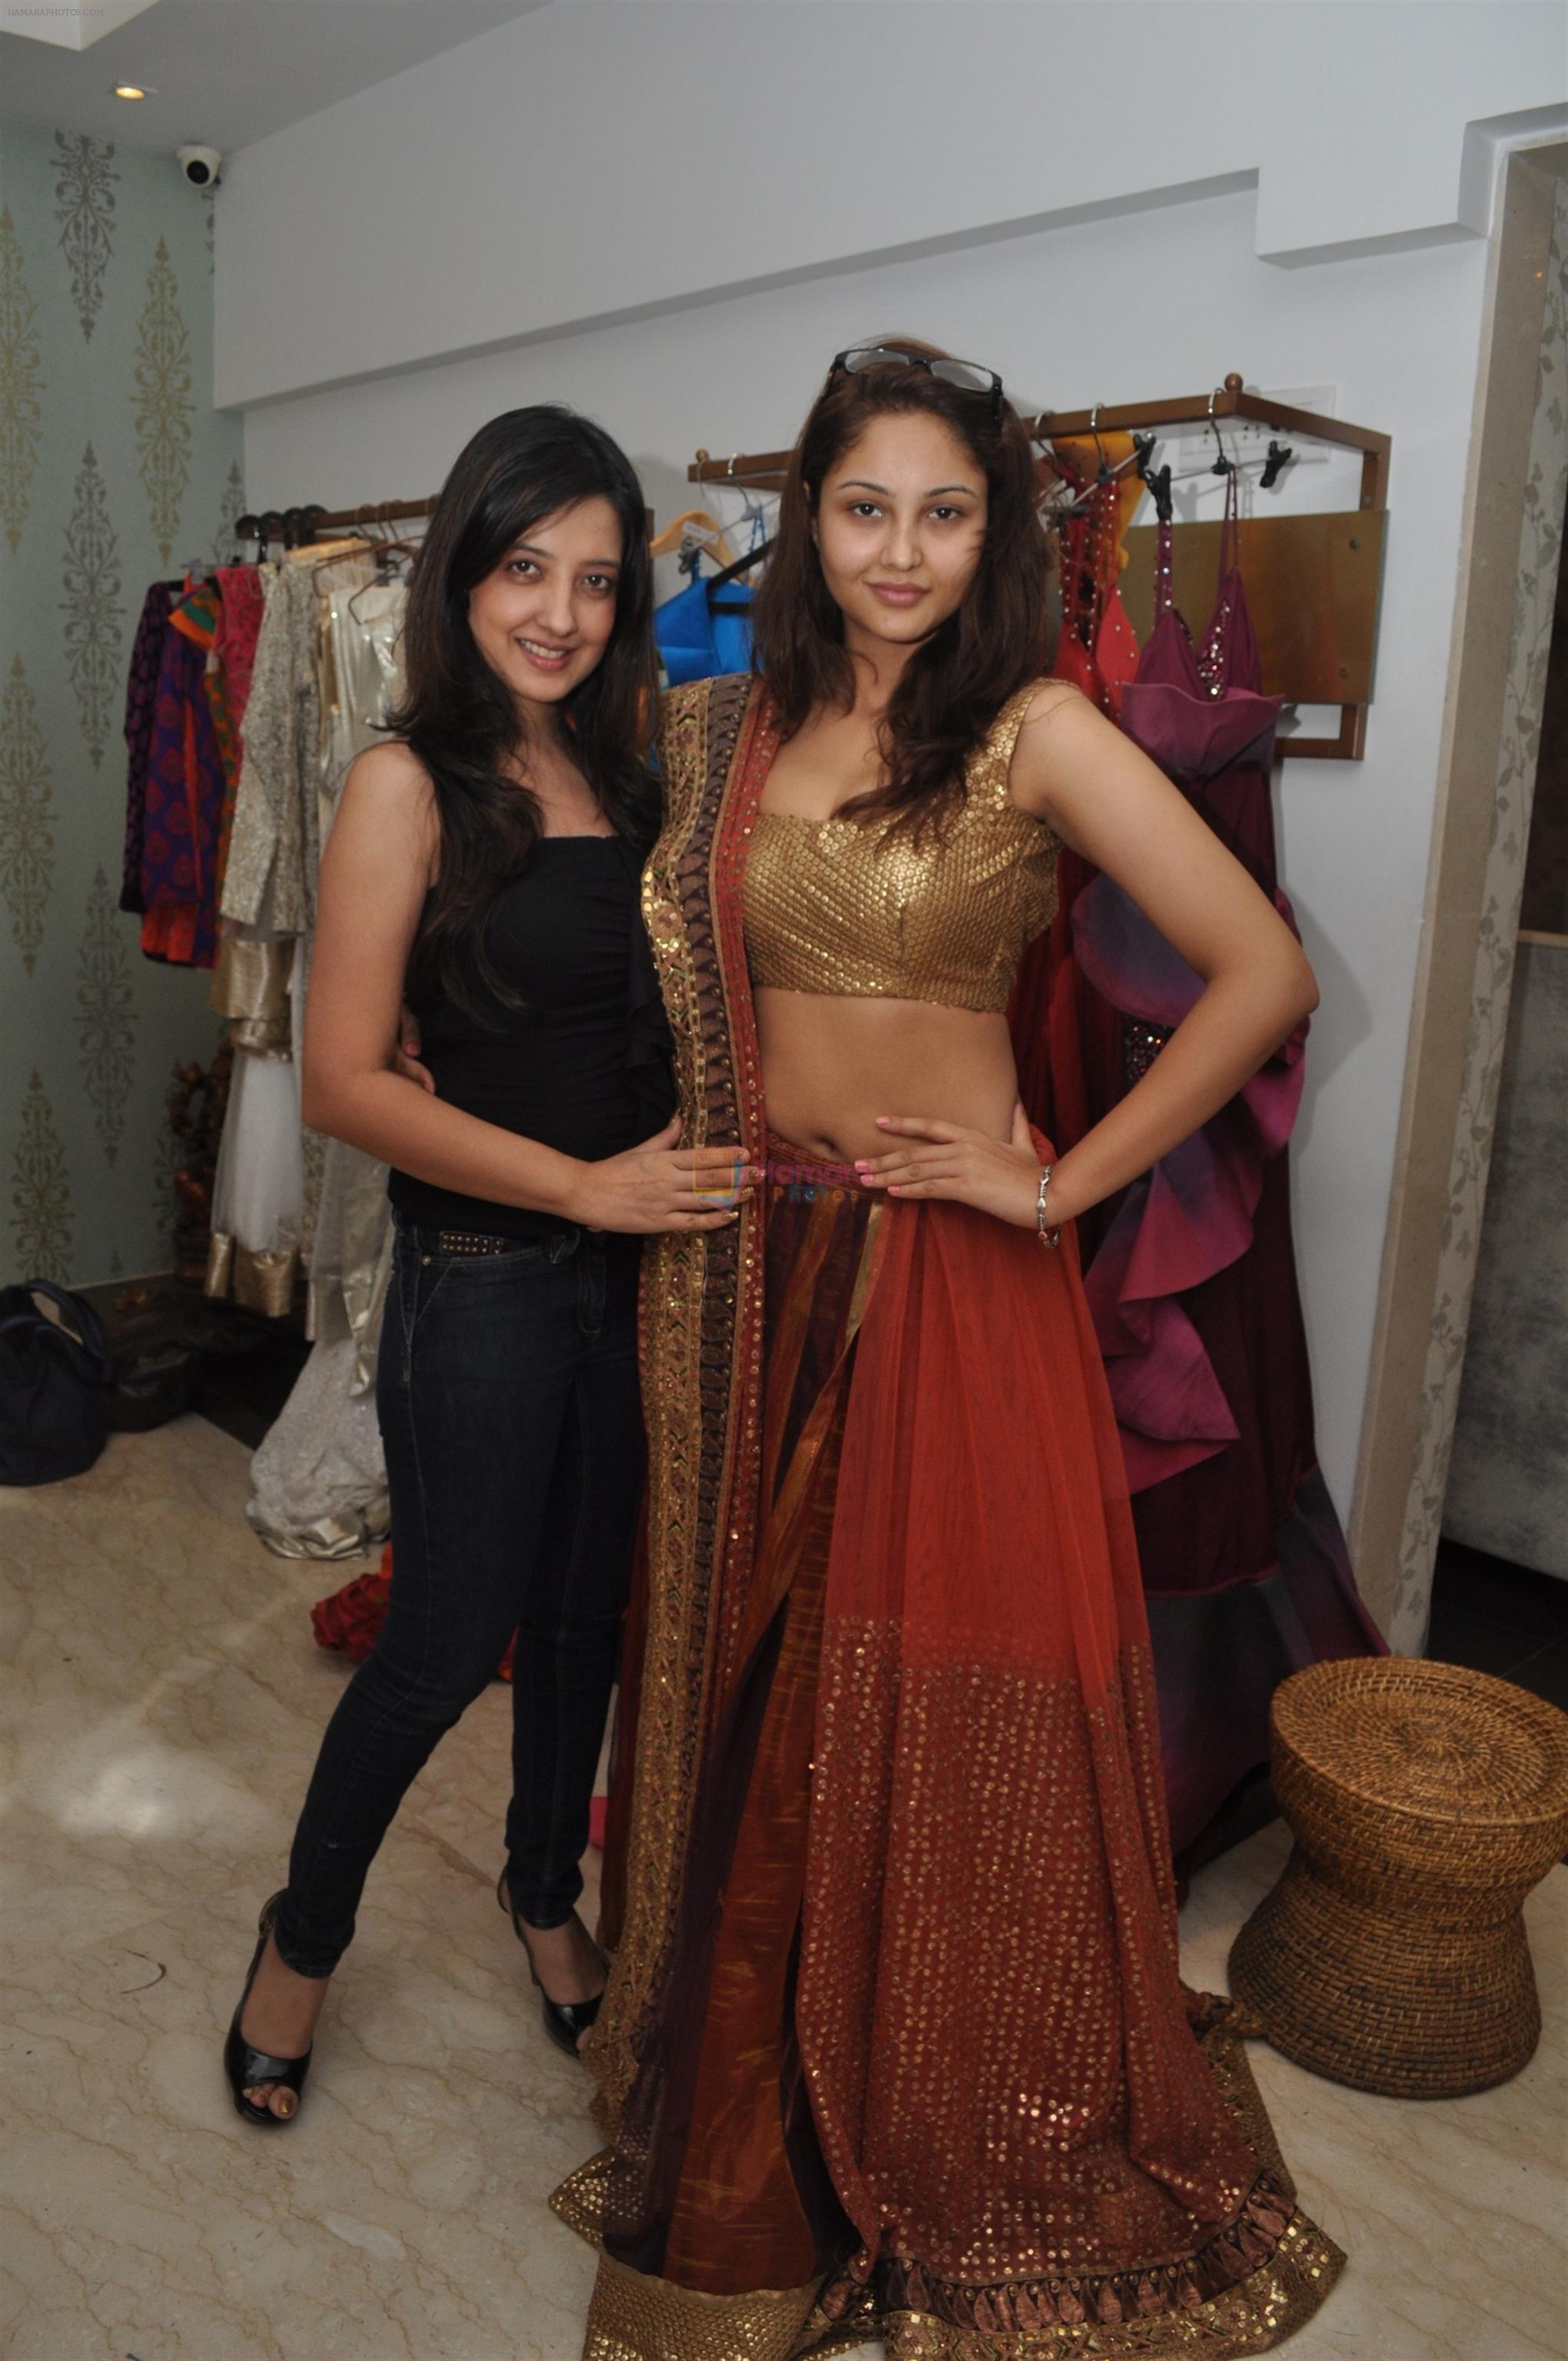 Amy Billimoria at Amy Billimoria's fittings of the models for her upcoming show sparkiling desires forever